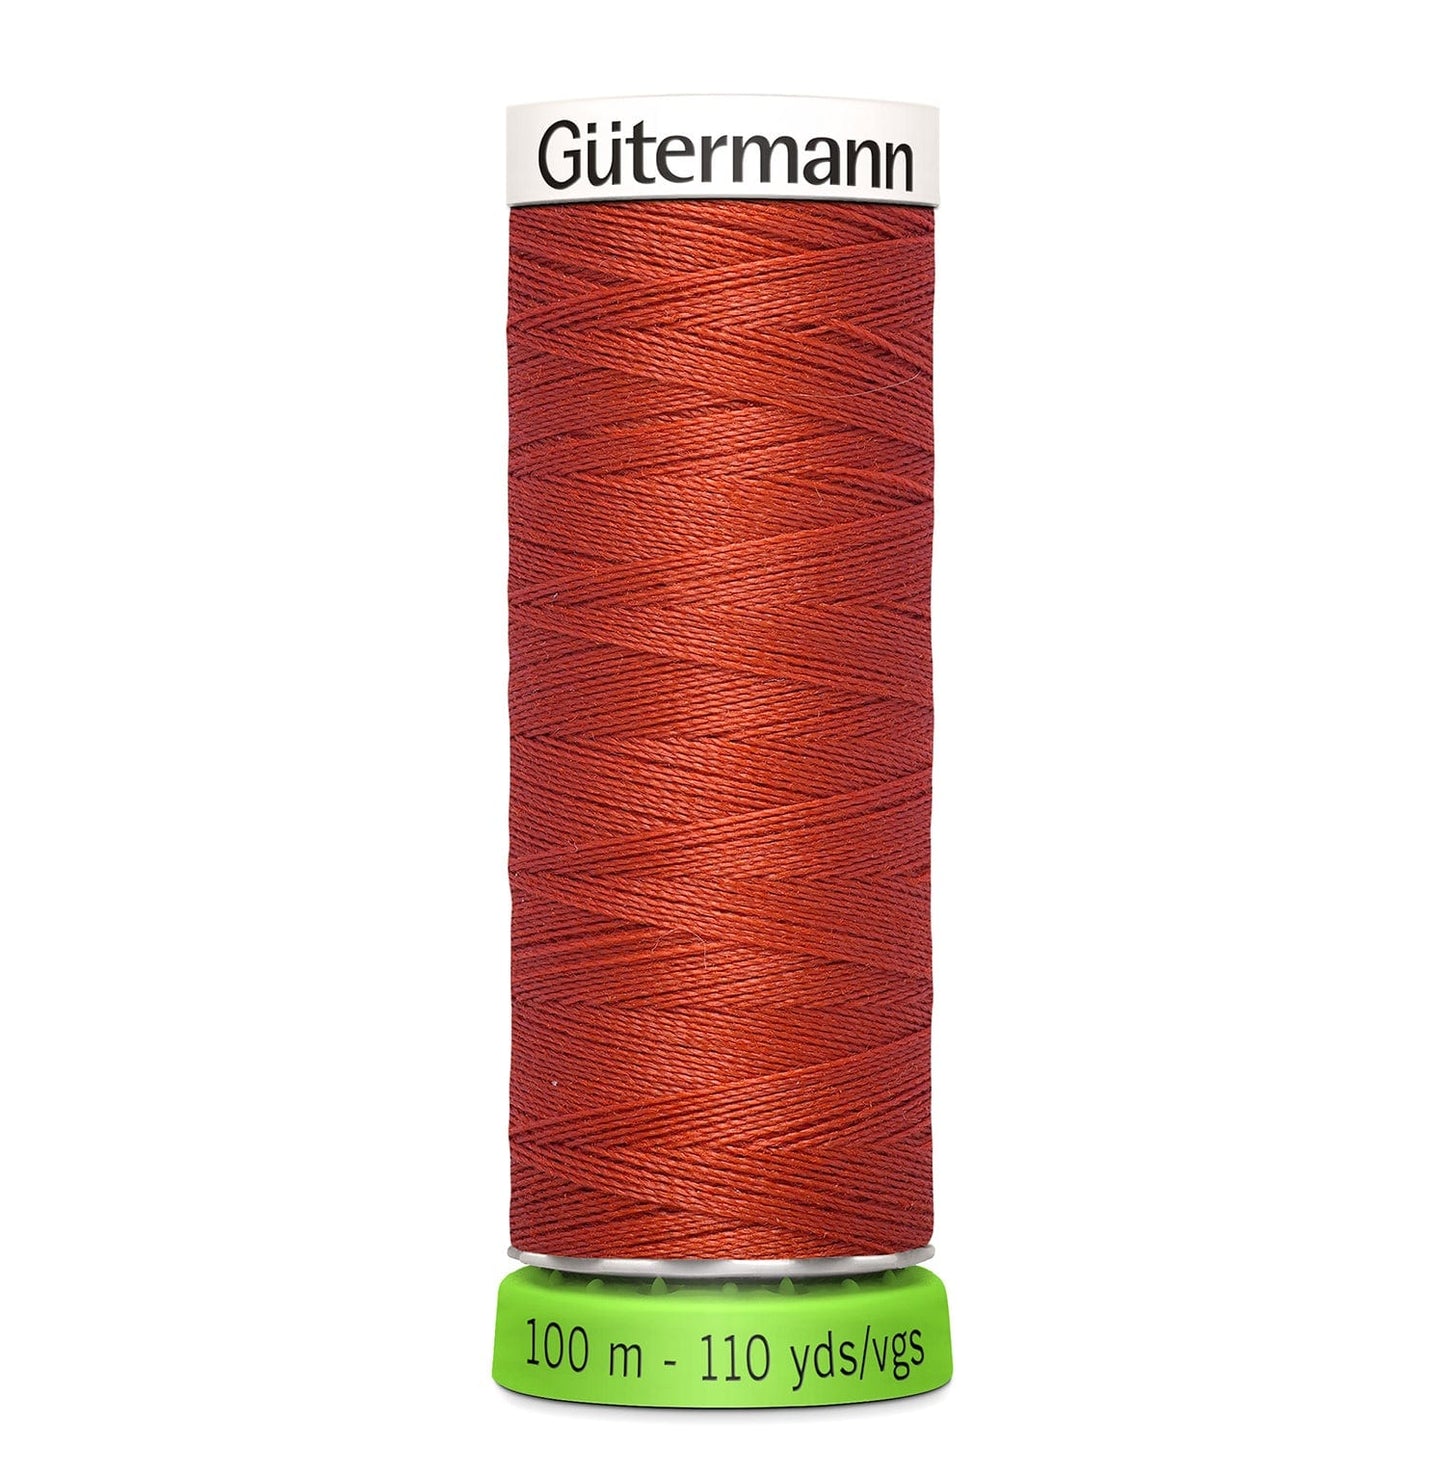 100 m Reel Gütermann Recycled Sew-All Thread in Terracotta no. 589